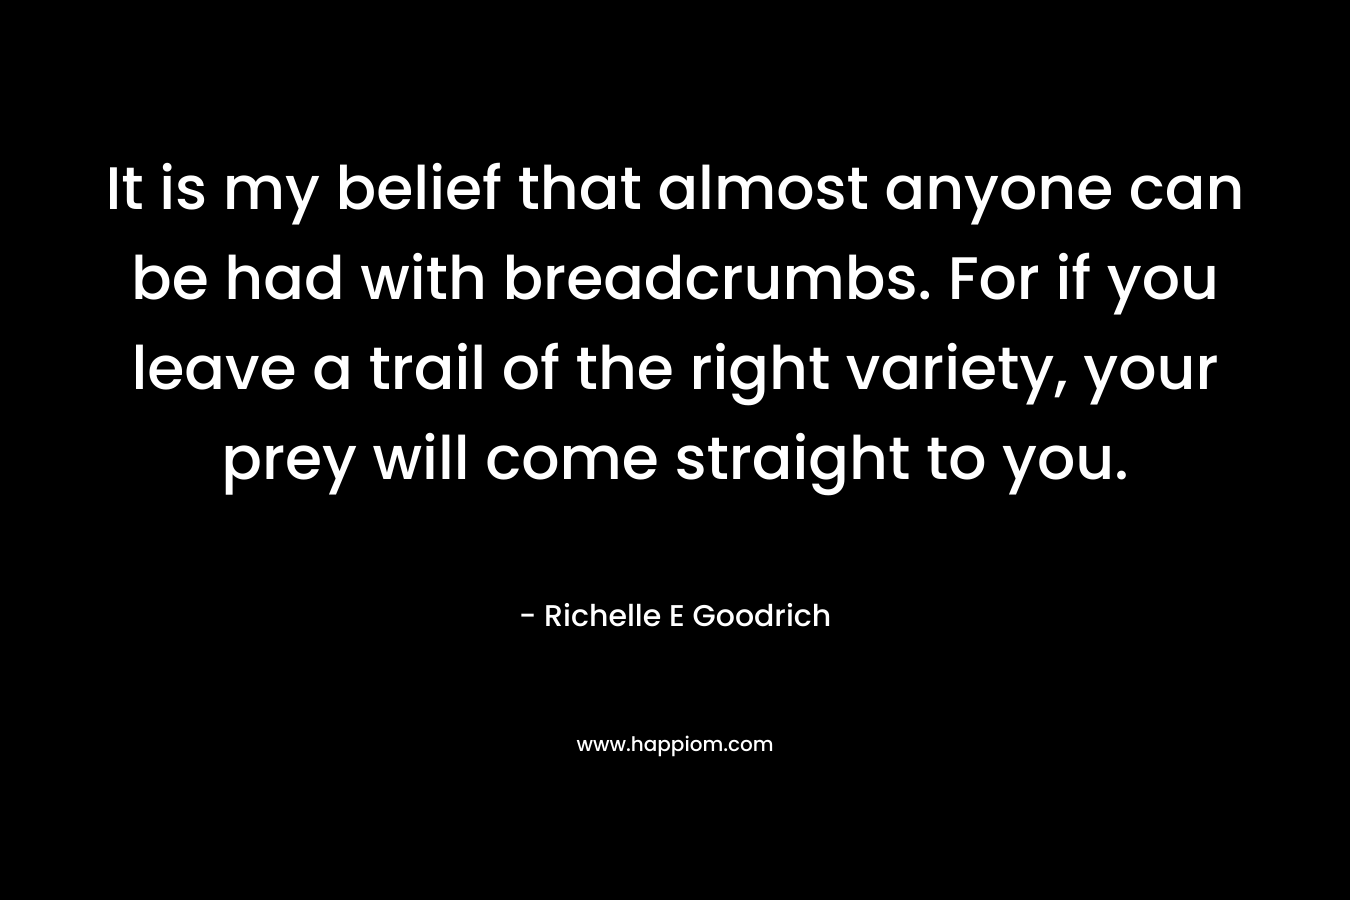 It is my belief that almost anyone can be had with breadcrumbs. For if you leave a trail of the right variety, your prey will come straight to you. – Richelle E Goodrich